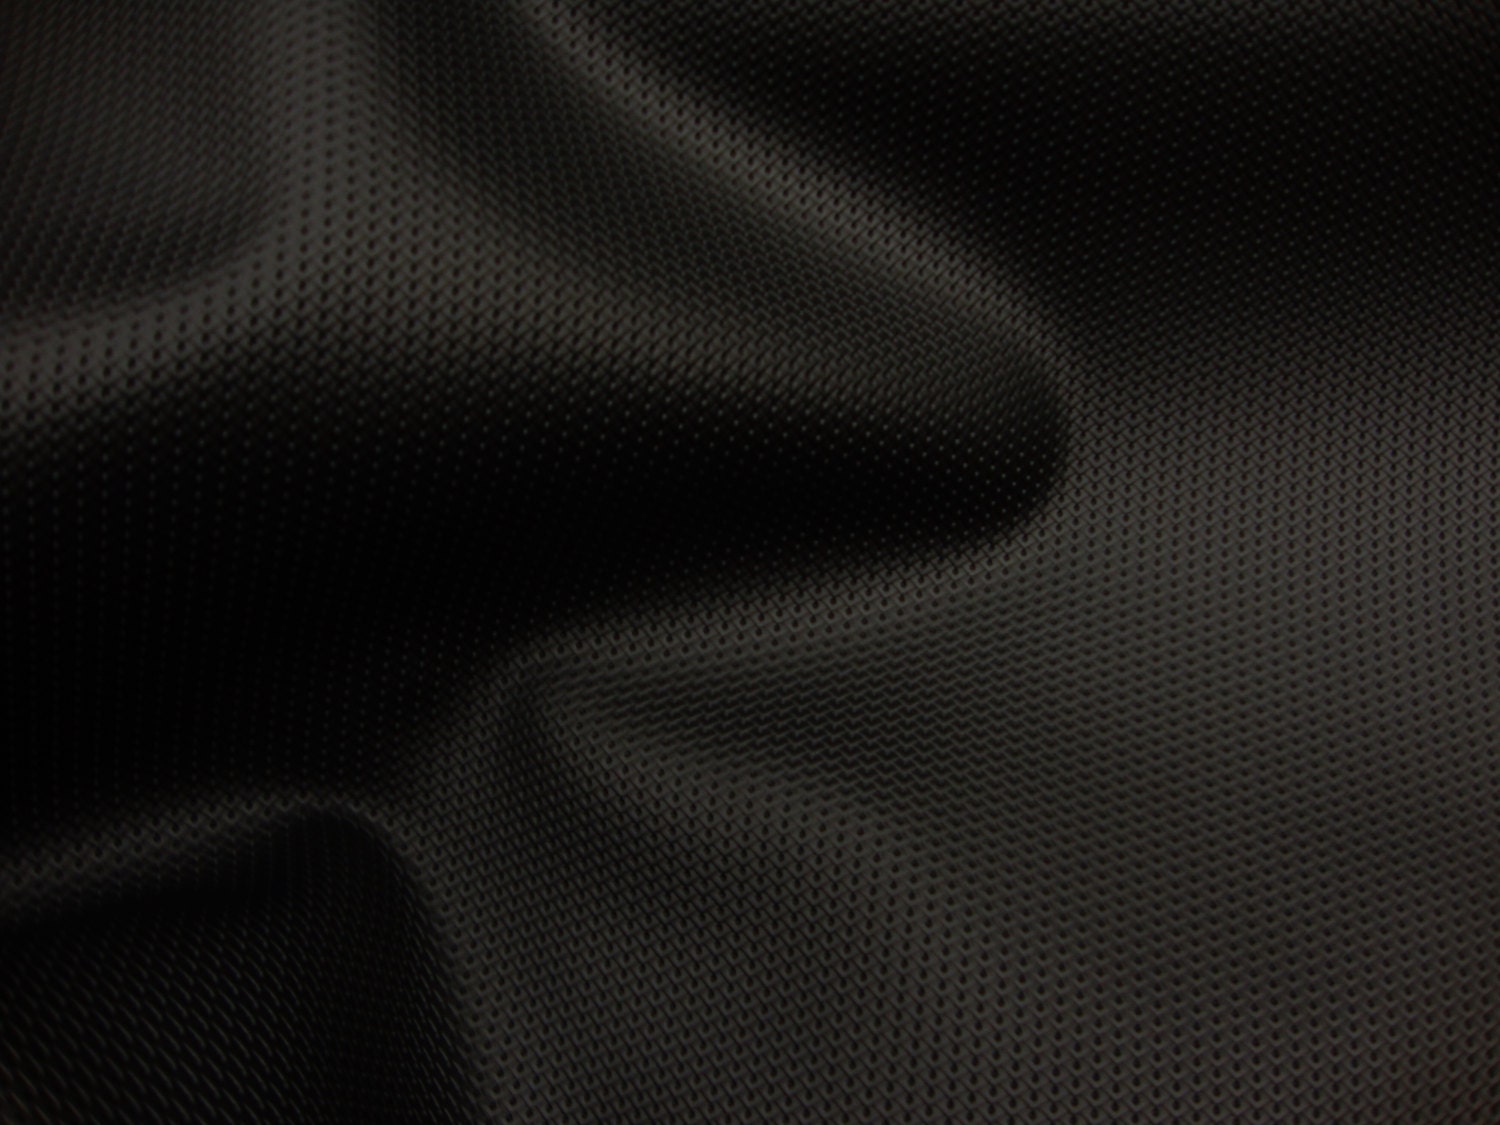 Vinyl Faux Leather Black Diamond Perforated Commercial Upholstery Marine  Grade Upholstery Fabric per Yard 